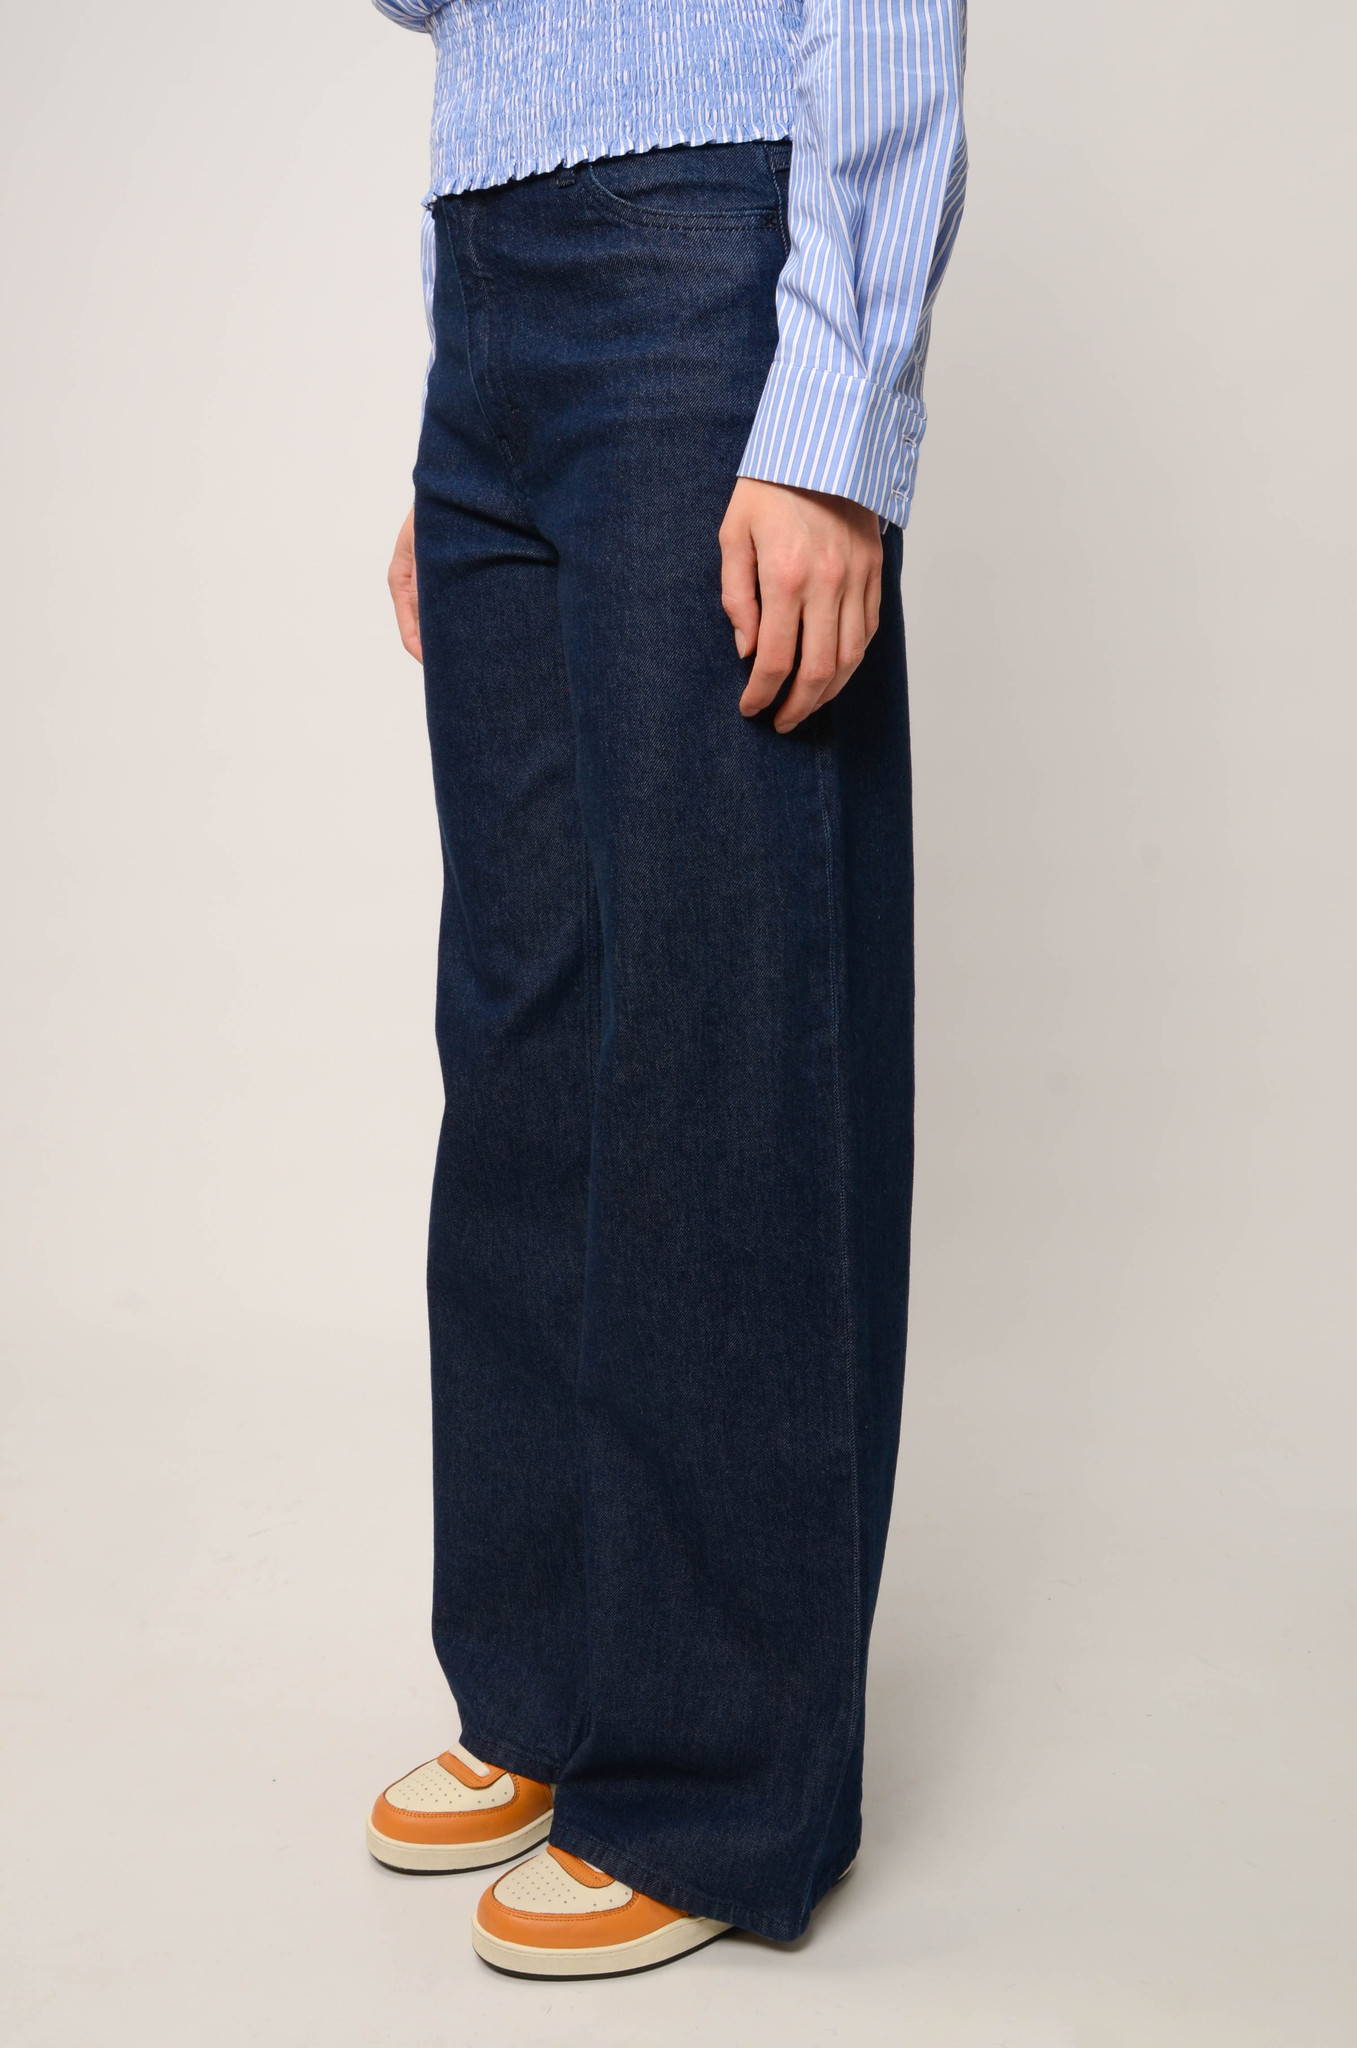 NALANEY JEANS IN BLUE RINSE-3